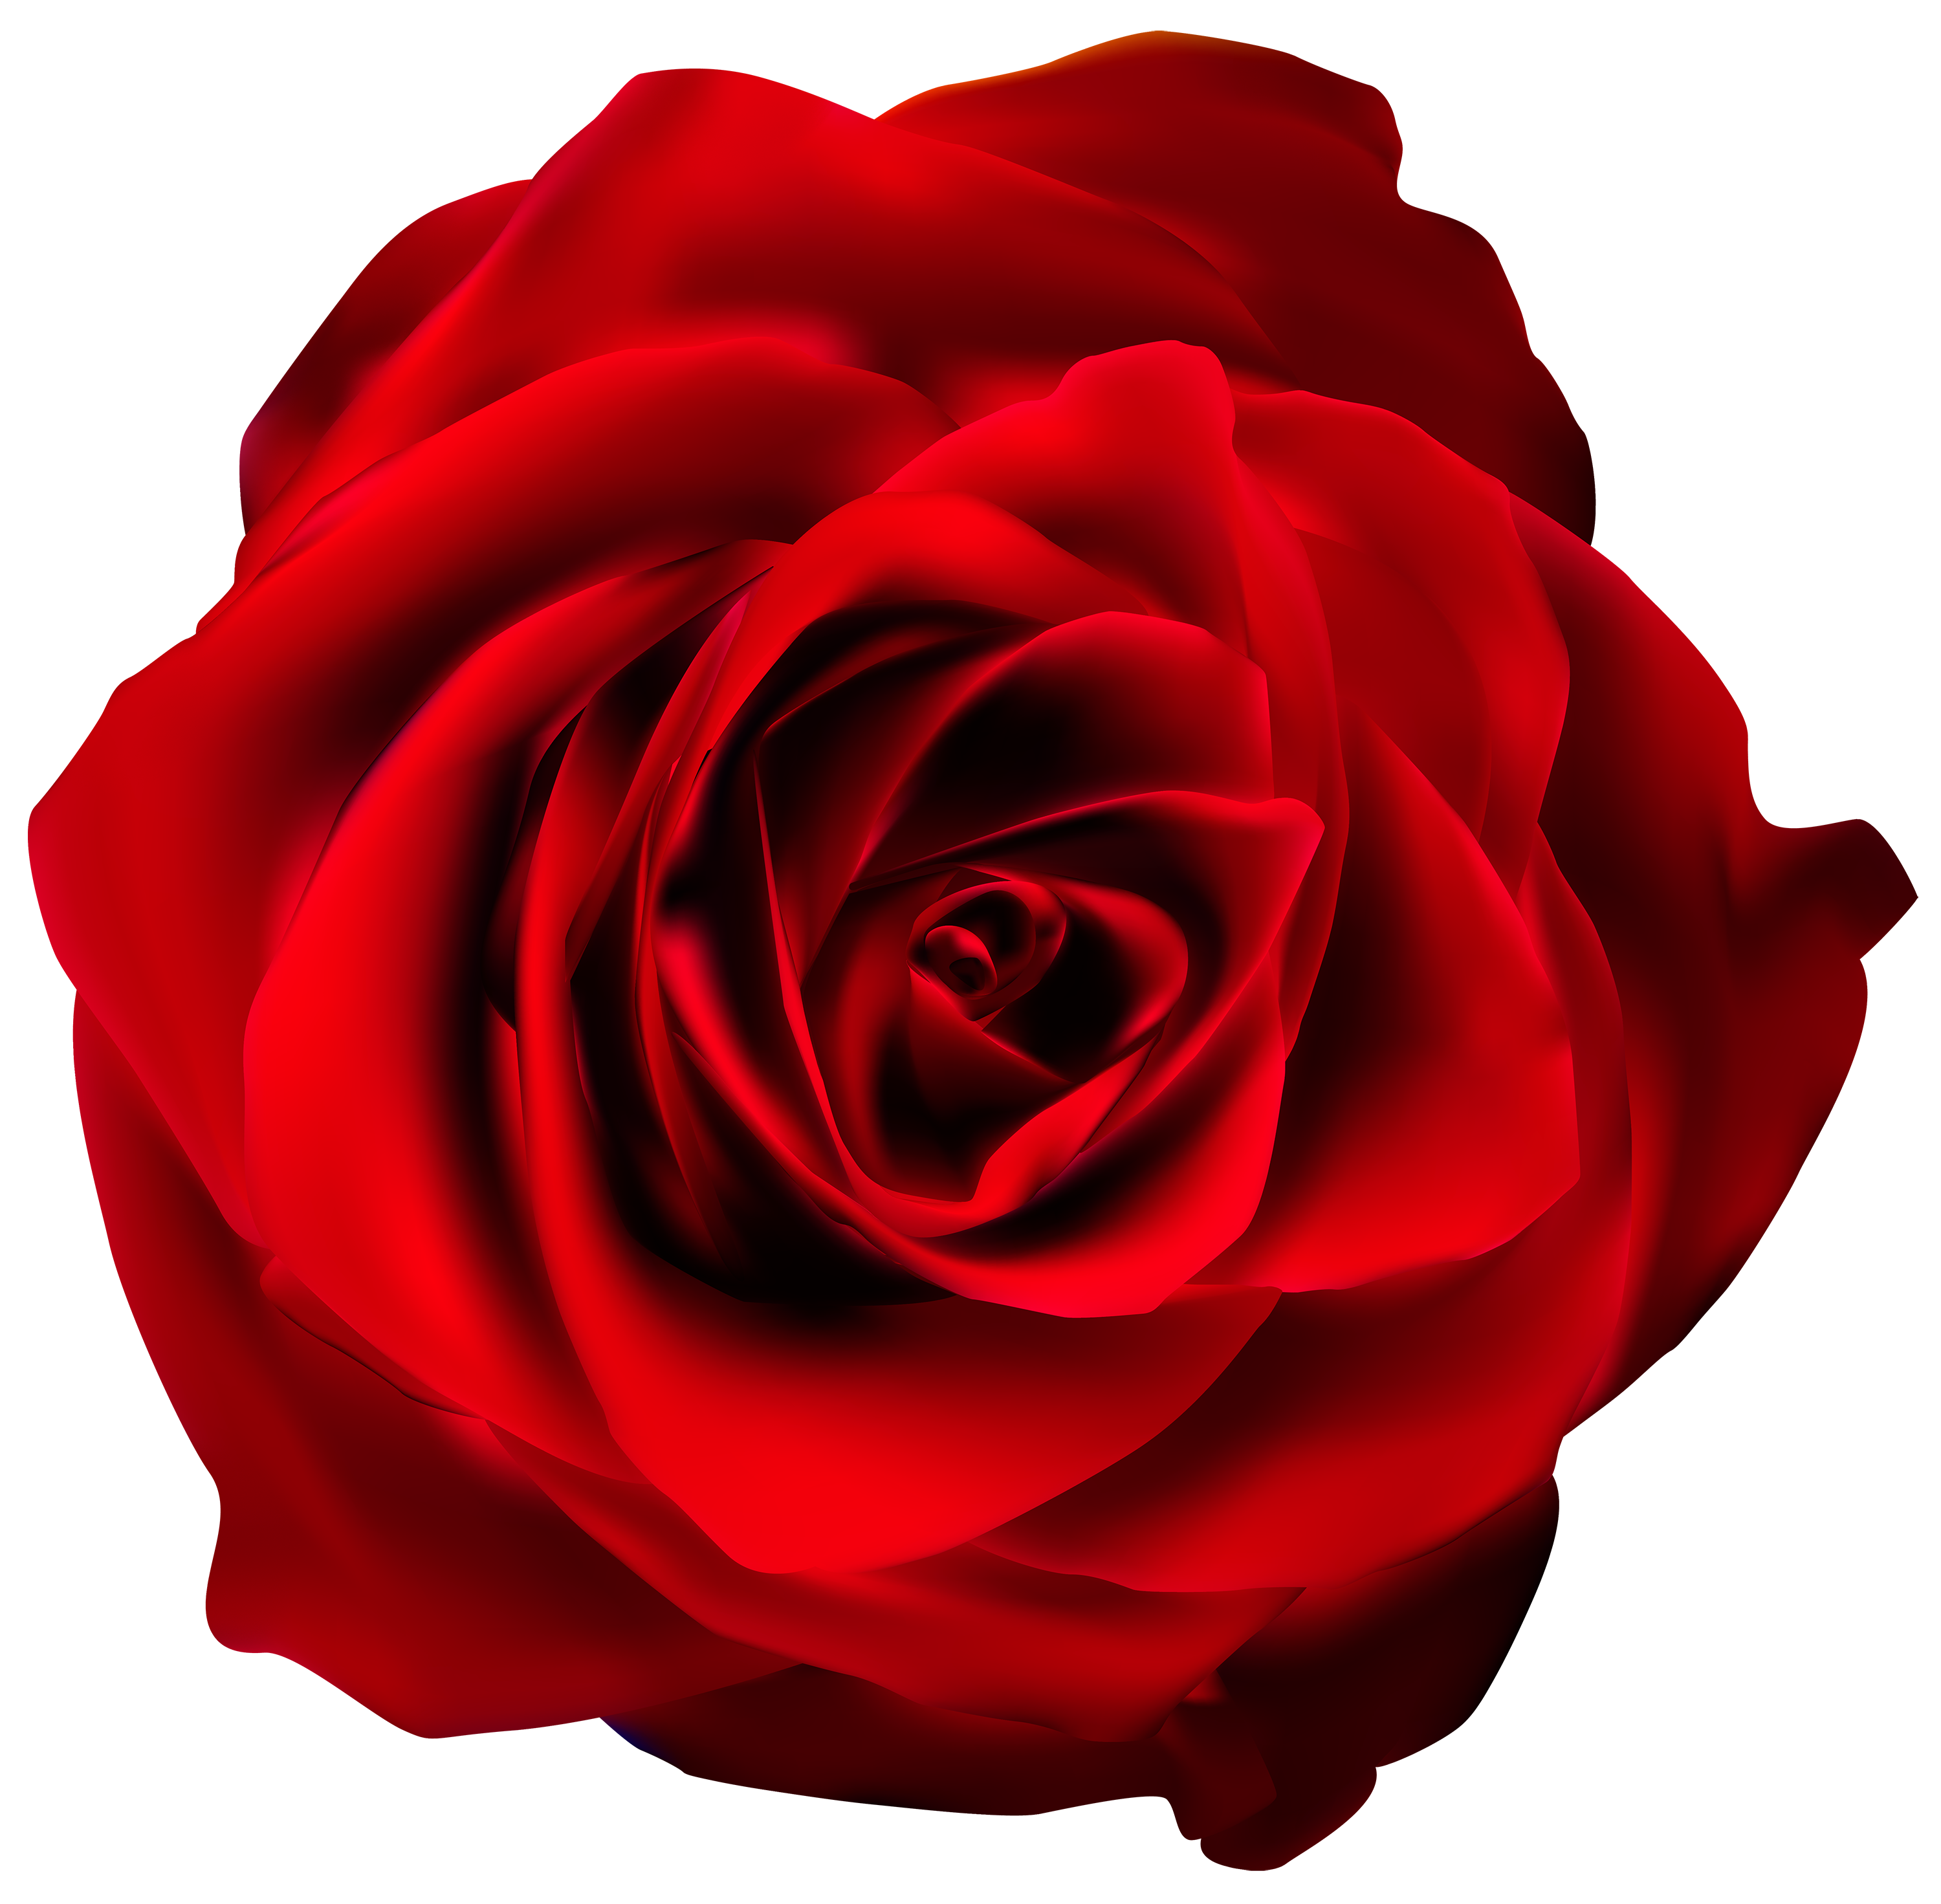 Free Rose Clipart Public Domain Flower clip art, images and graphics